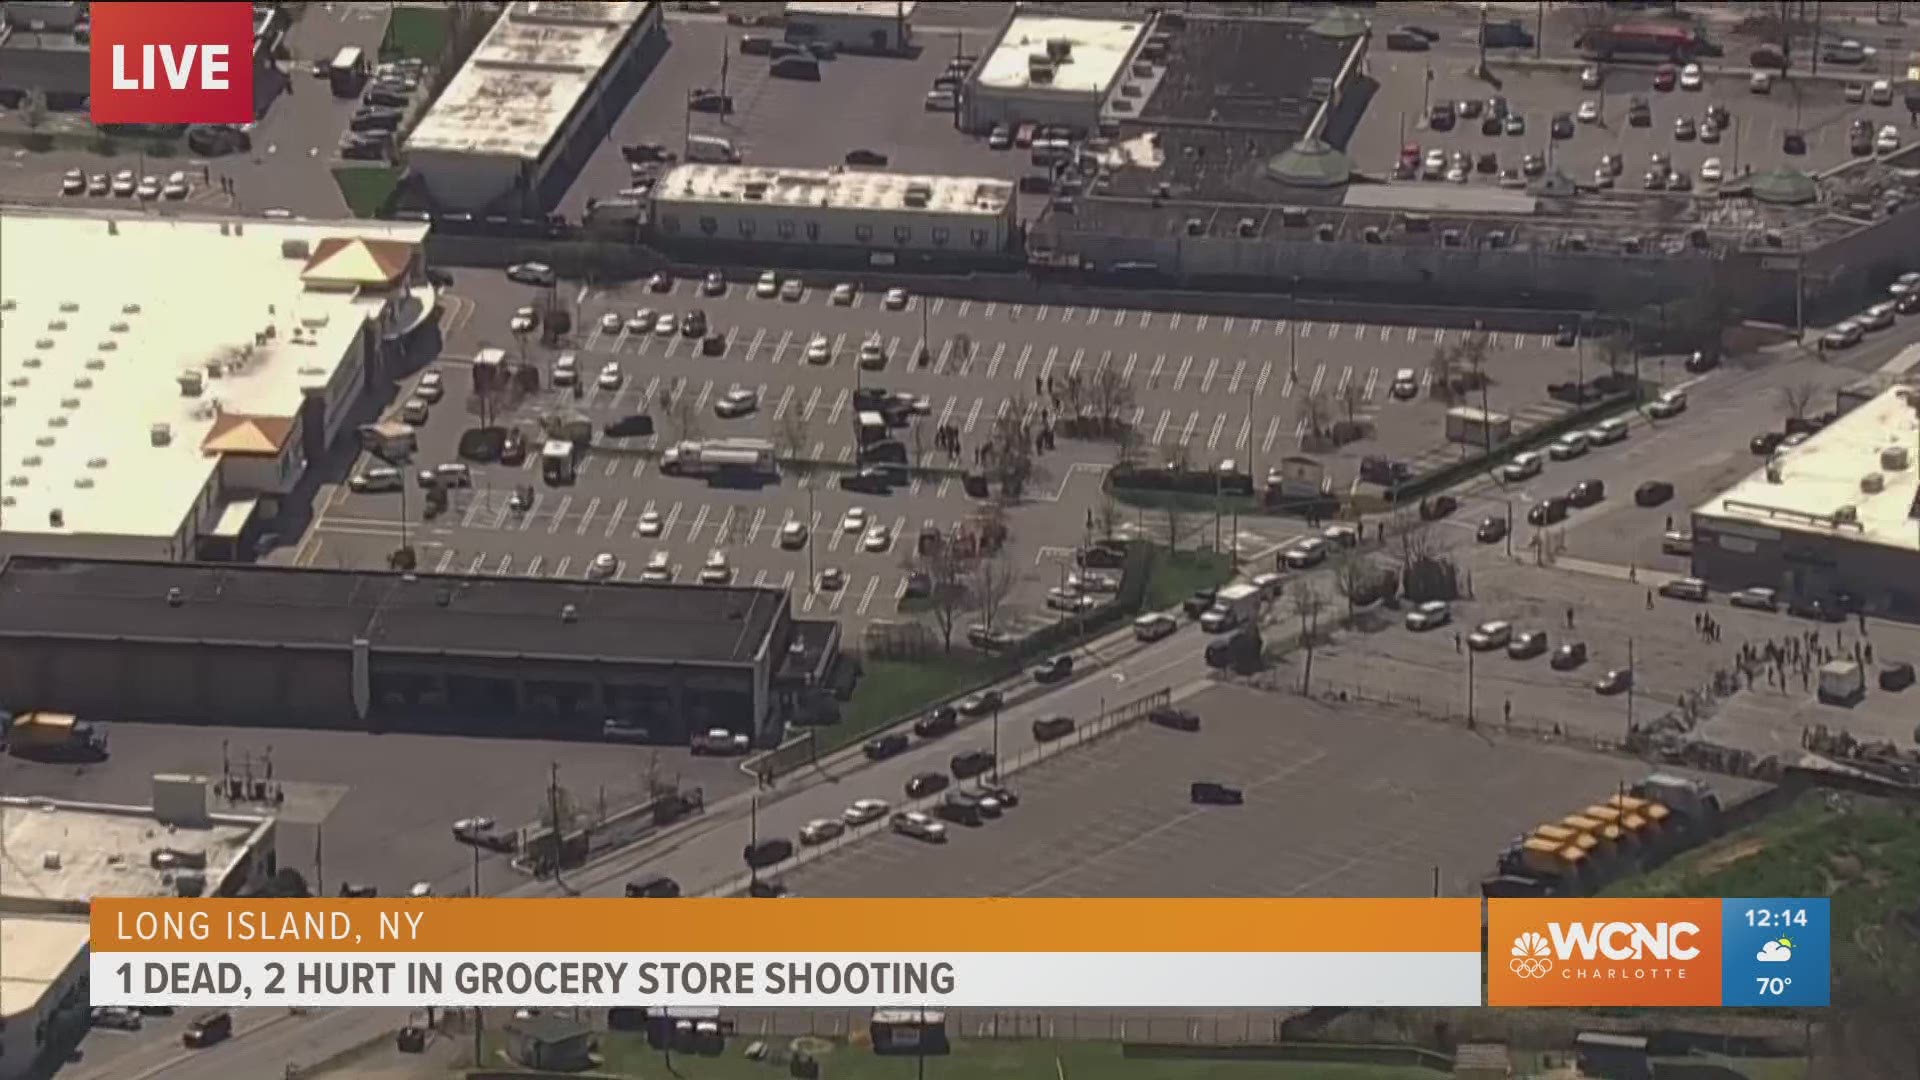 One person was killed and two others were injured in a shooting at a grocery store on New York's Long Island Tuesday, police said.